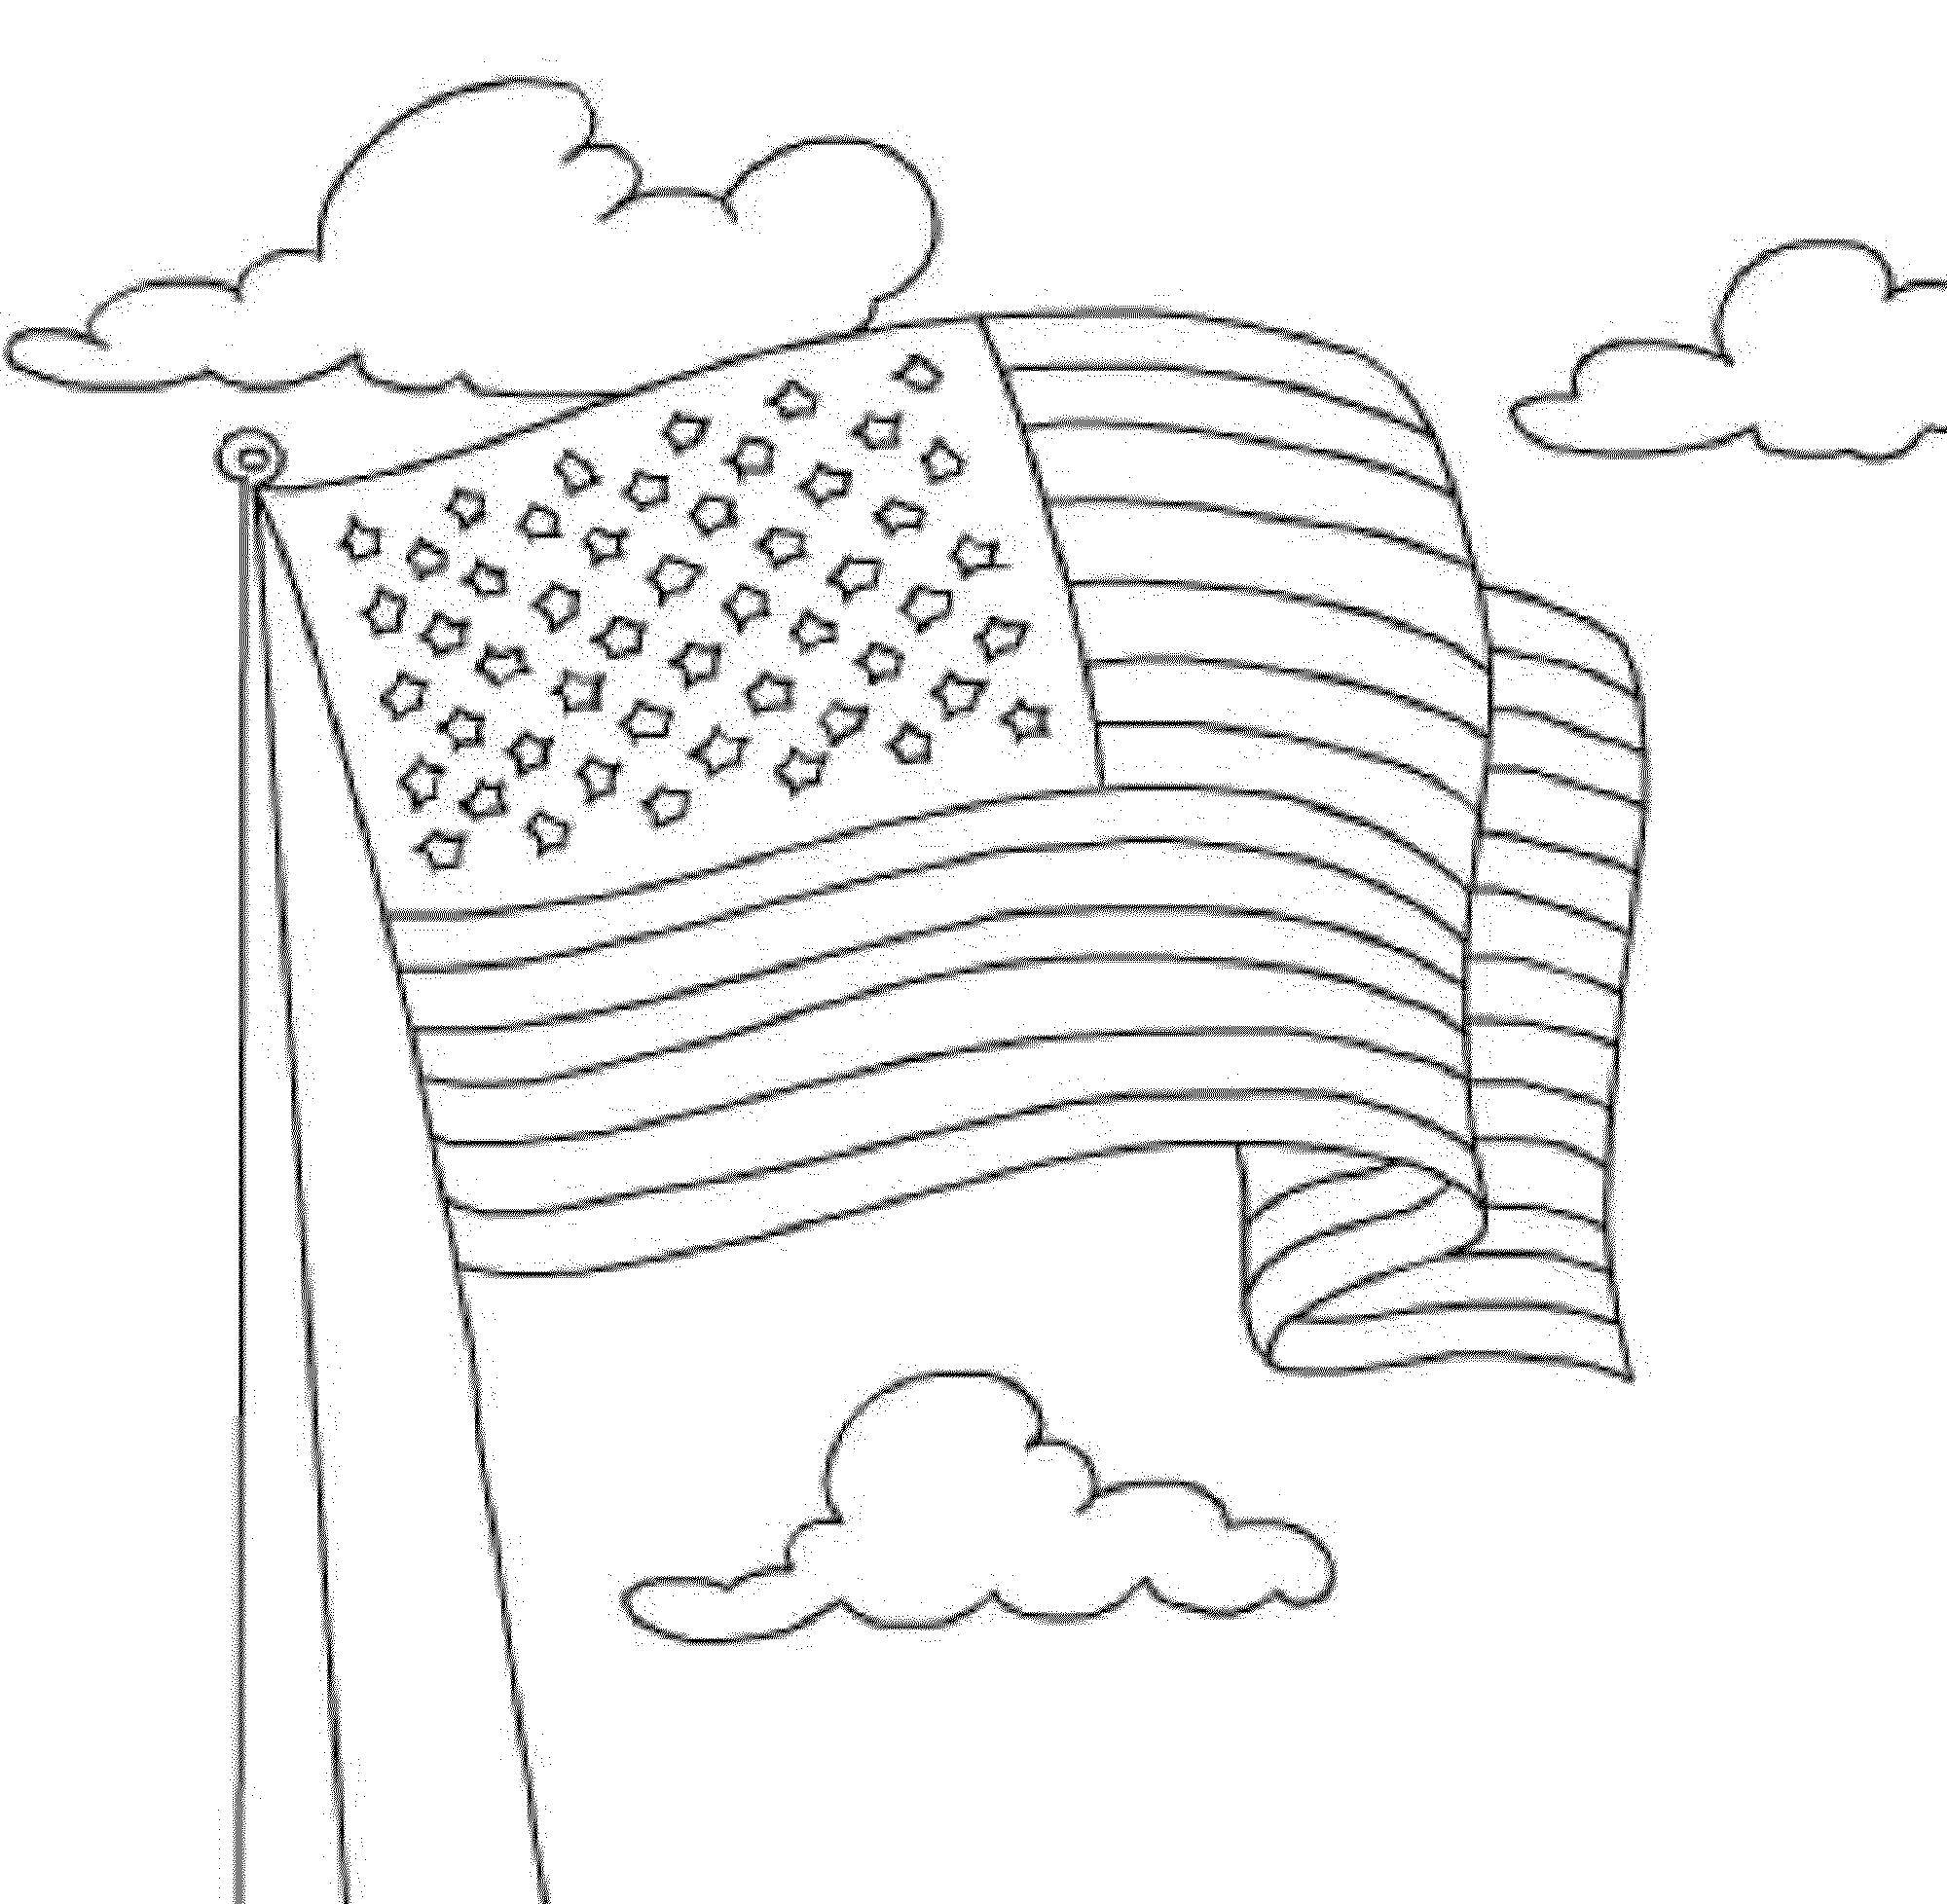 Coloring The flag of the USA. Category Flags. Tags:  flags, USA, America.